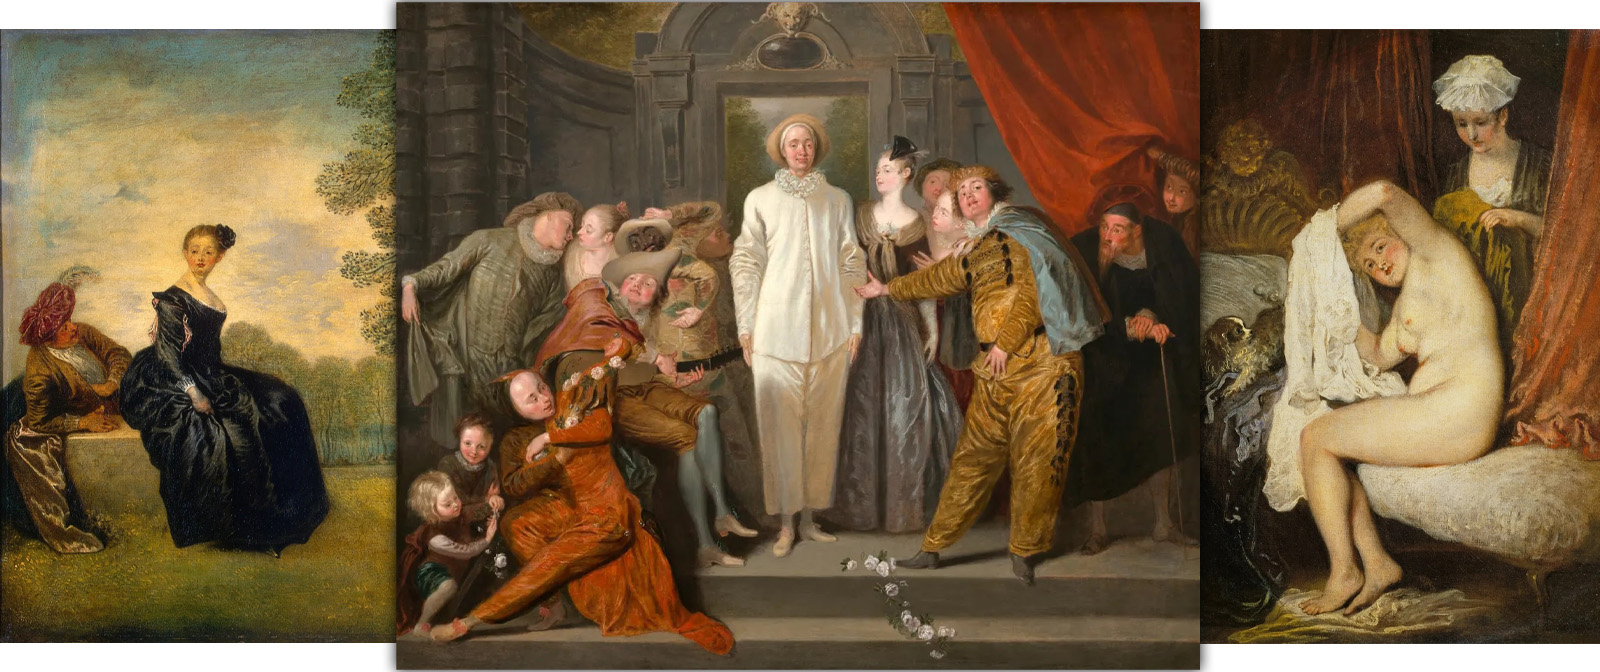 The gallant and not always humble paintings of Antoine Watteau, which are far more interesting and complex than they appear at first glance.